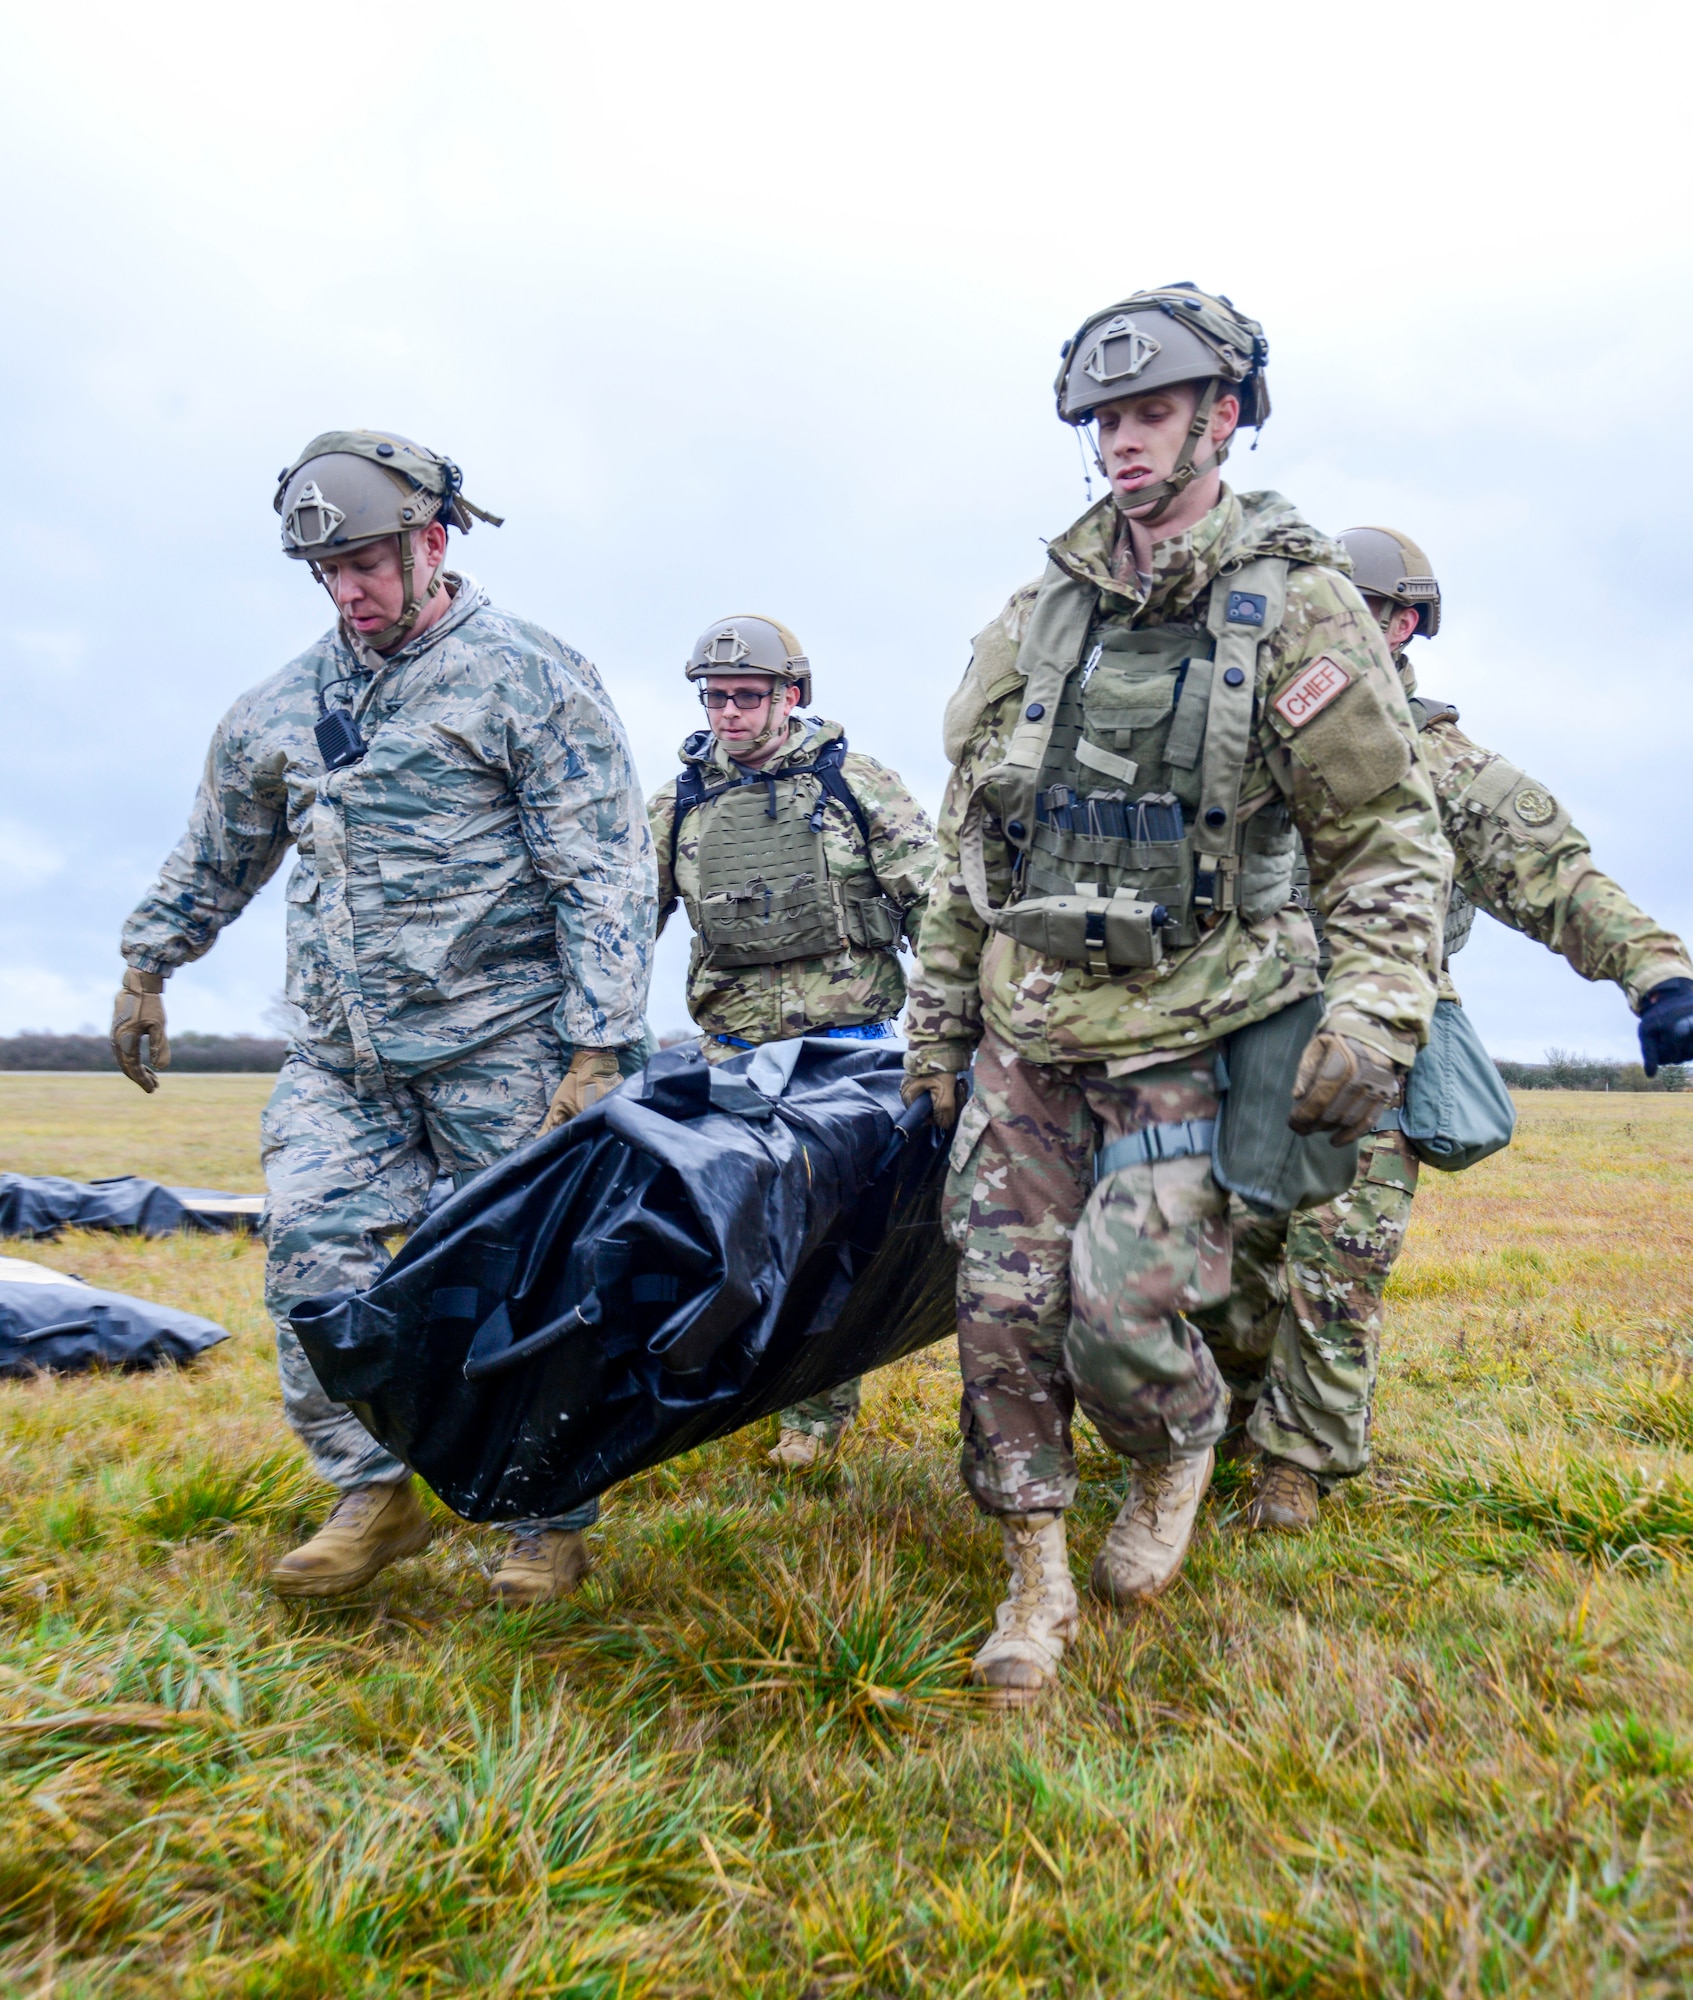 U.S. Airmen assigned to the 435th Contingency Response Group, 435th Air Ground Operations Wing, Ramstein Air Base, Germany, carry a Tent Model 60 bag during exercise Contested Forge on Grostenquin Air Base, France, Dec. 3, 2018. Contested Forge is an annual exercise that tests the 435th CRG's ability to build a forward operating base and conduct airfield operations in an austere environment, friendly or hostile. (U.S. Air Force photo by Staff Sgt. Timothy Moore)